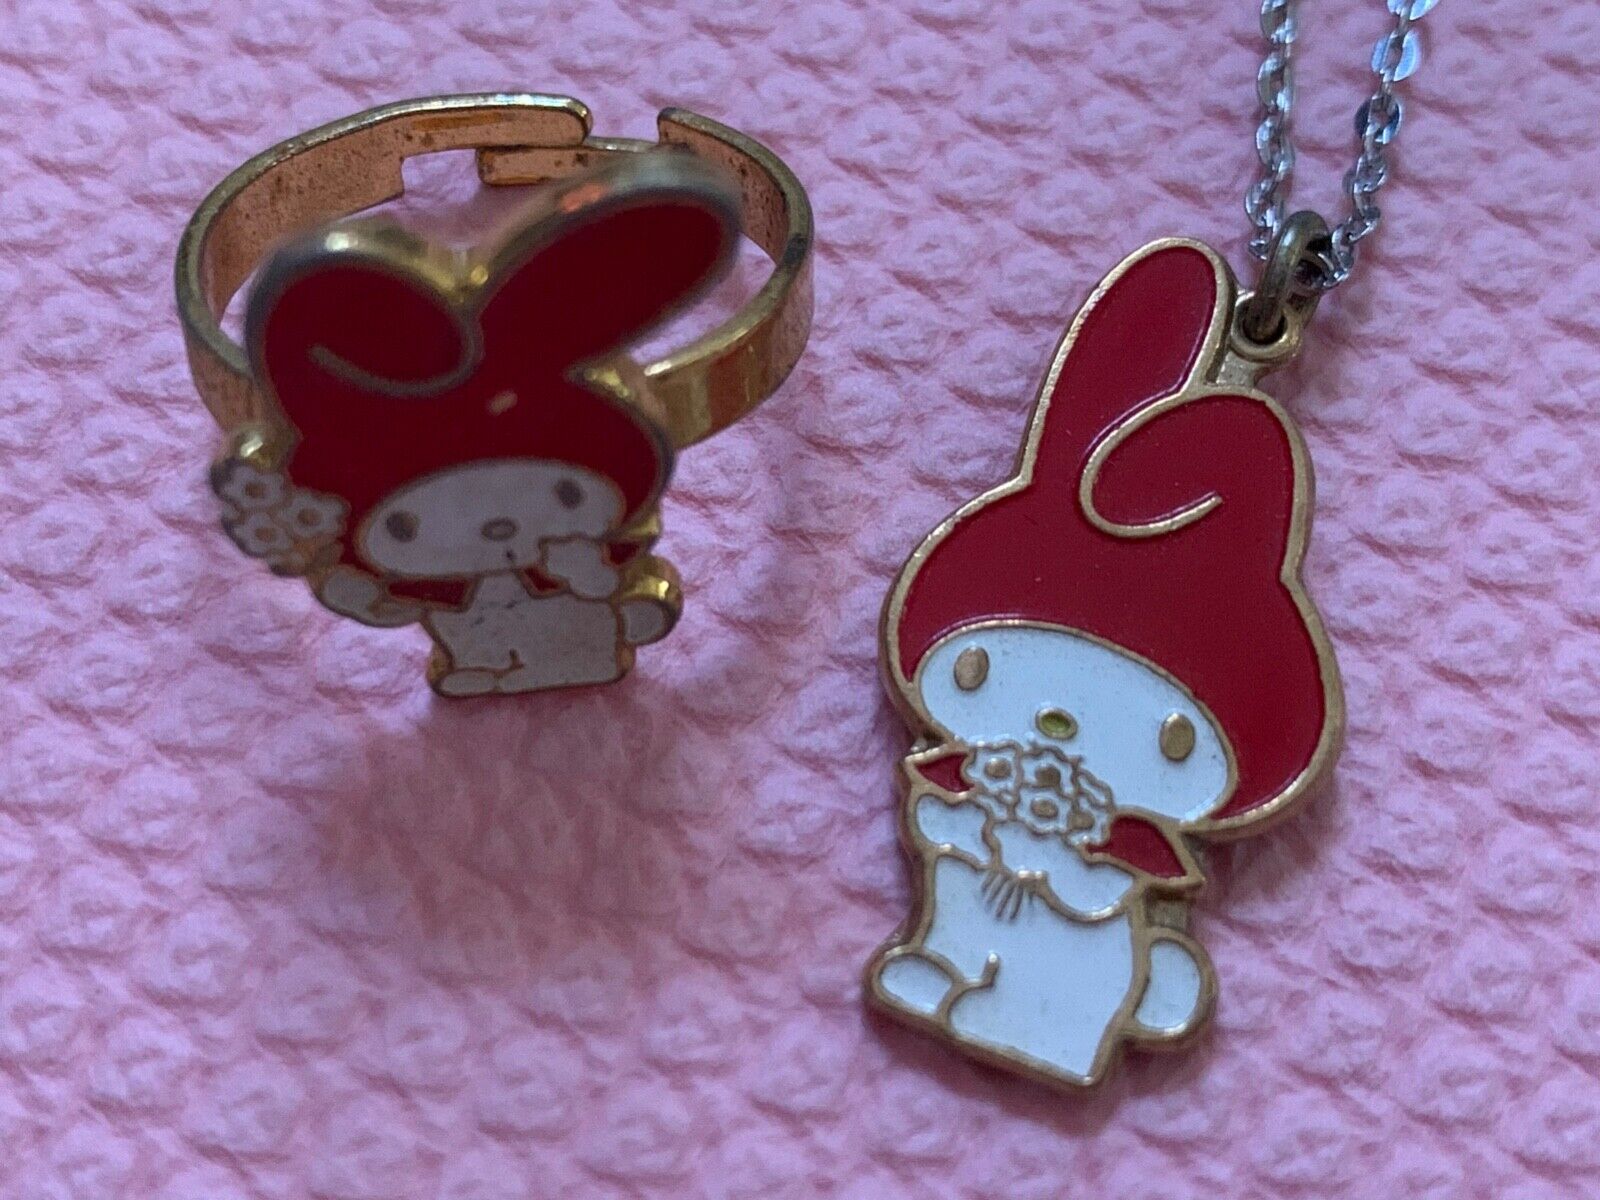 SANRIO vintage 70s Japan 1976 Red My Melody flower metal pendant necklace & ring